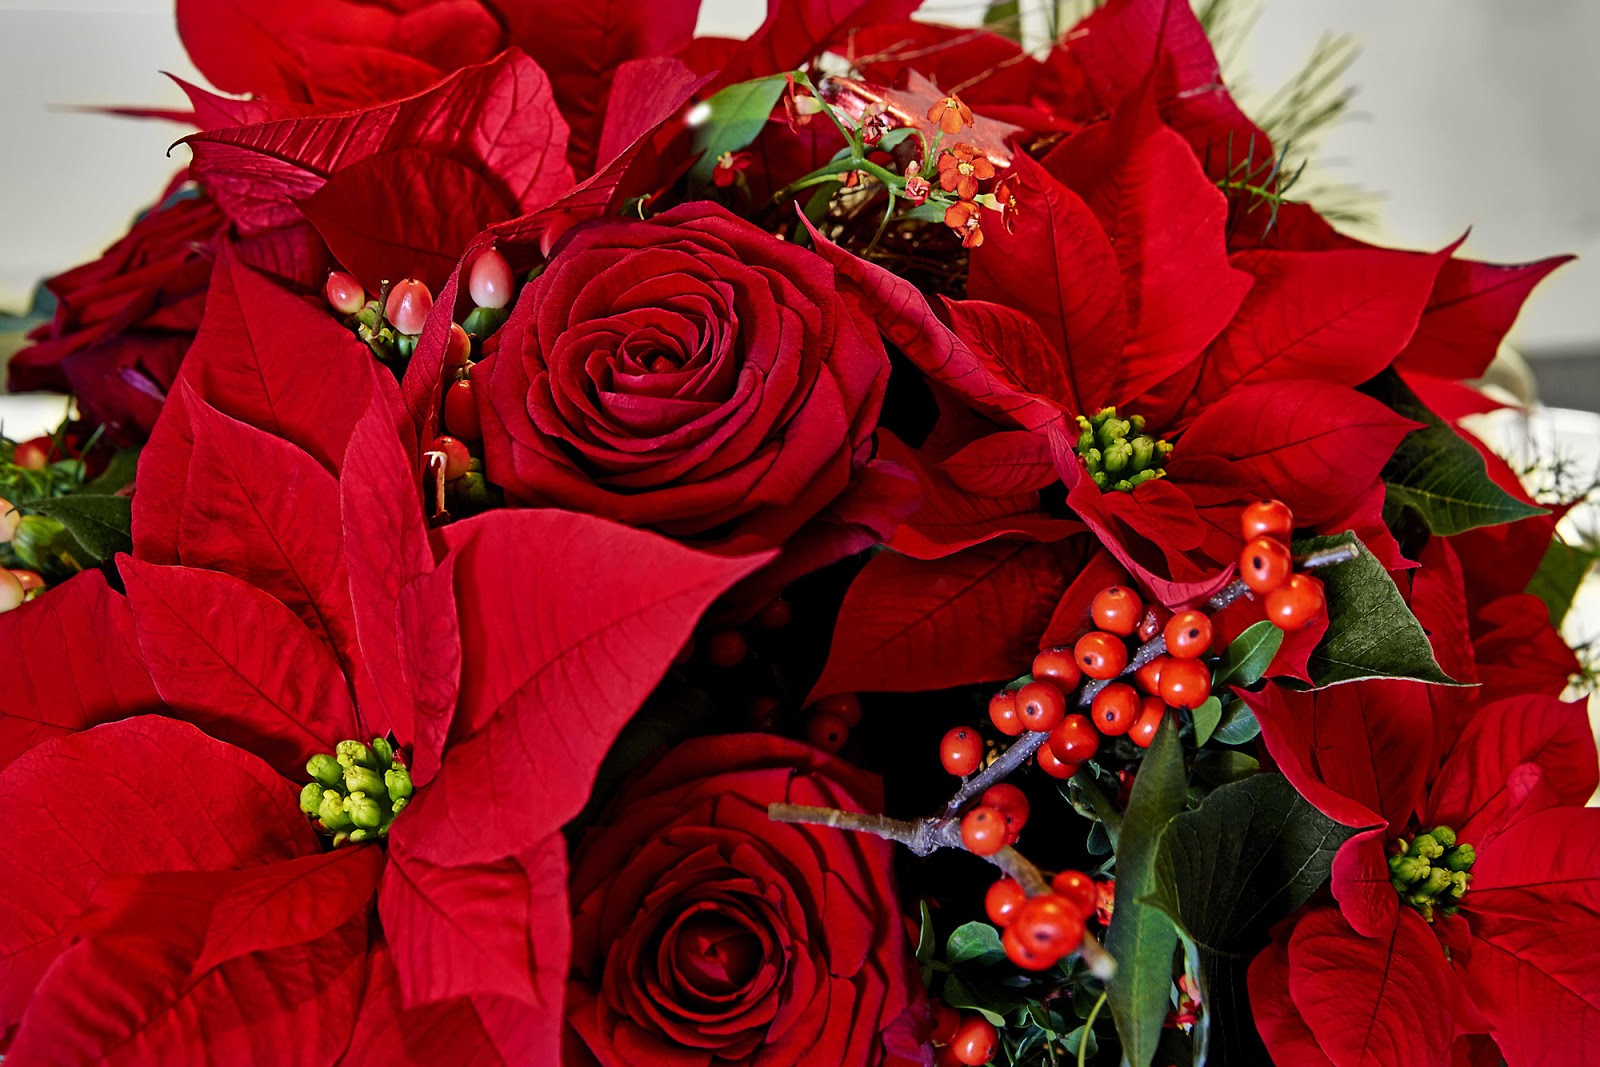 How To Care For Your Poinsettia - THE Christmas Plant - Mother Distracted